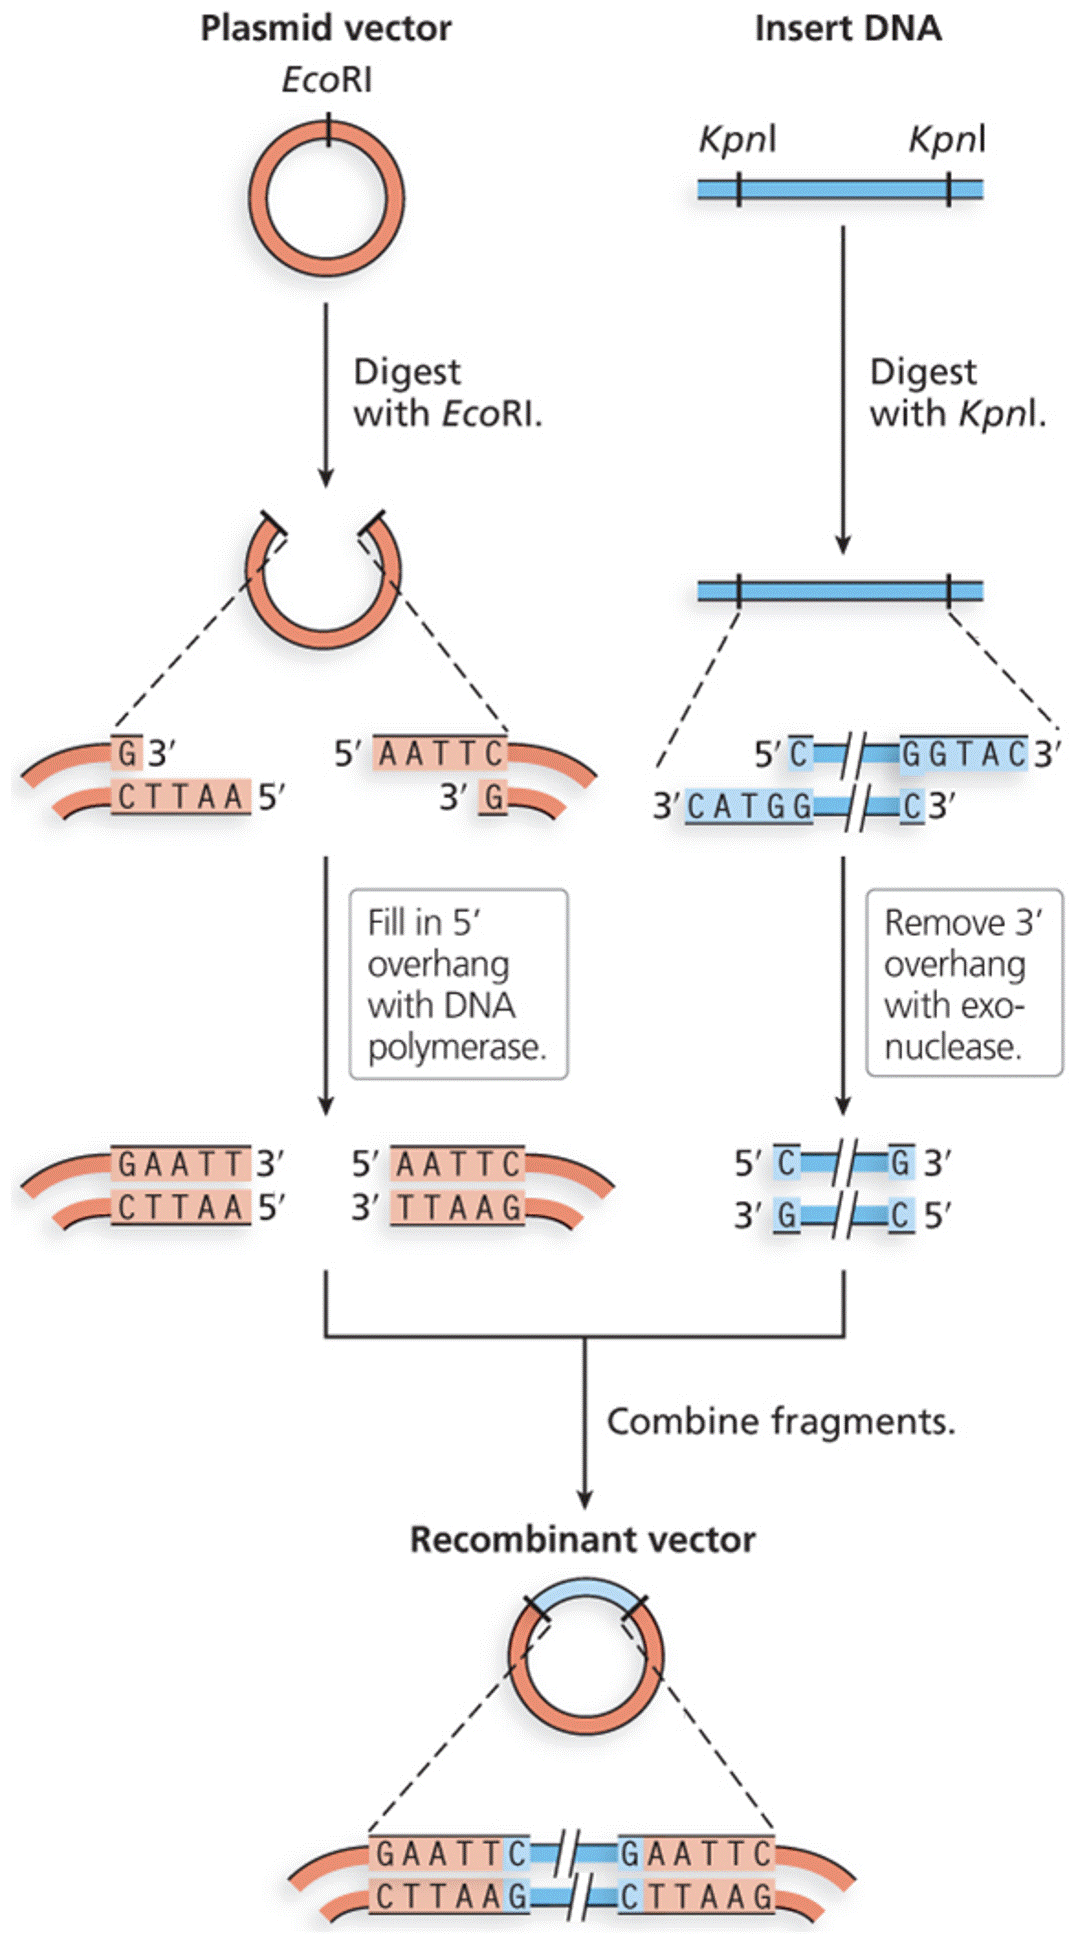 Connecting blunt ends to create recombinant DNA molecules